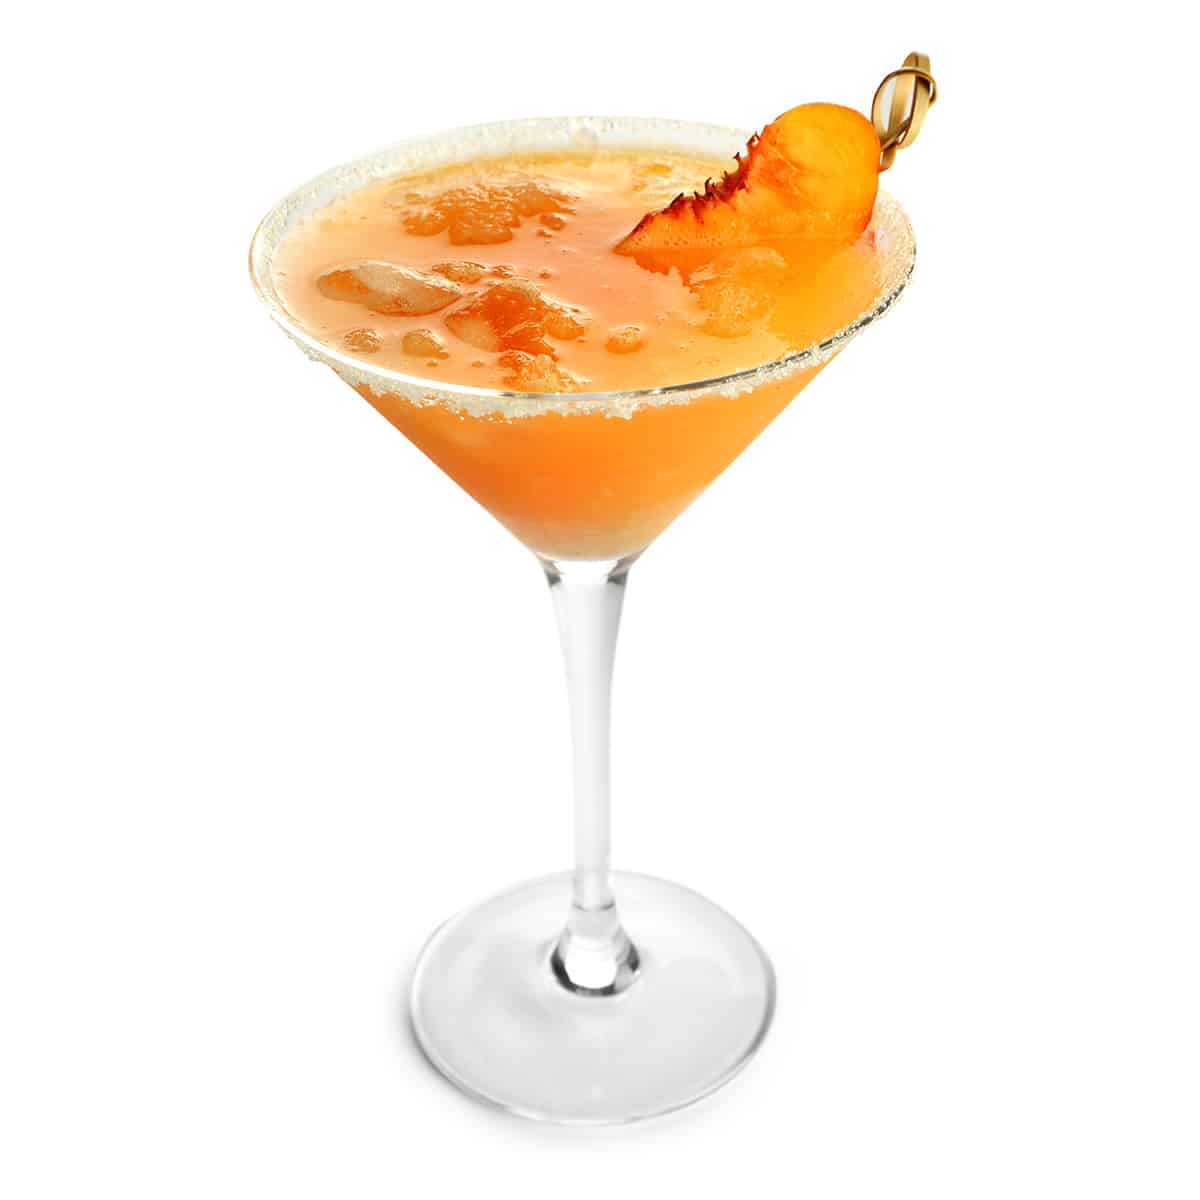 (Out of Season)Rosemary Peach Margarita - 1.5oz Tequila, .75oz Rosemary Peach Syrup, .75oz Lime Juice